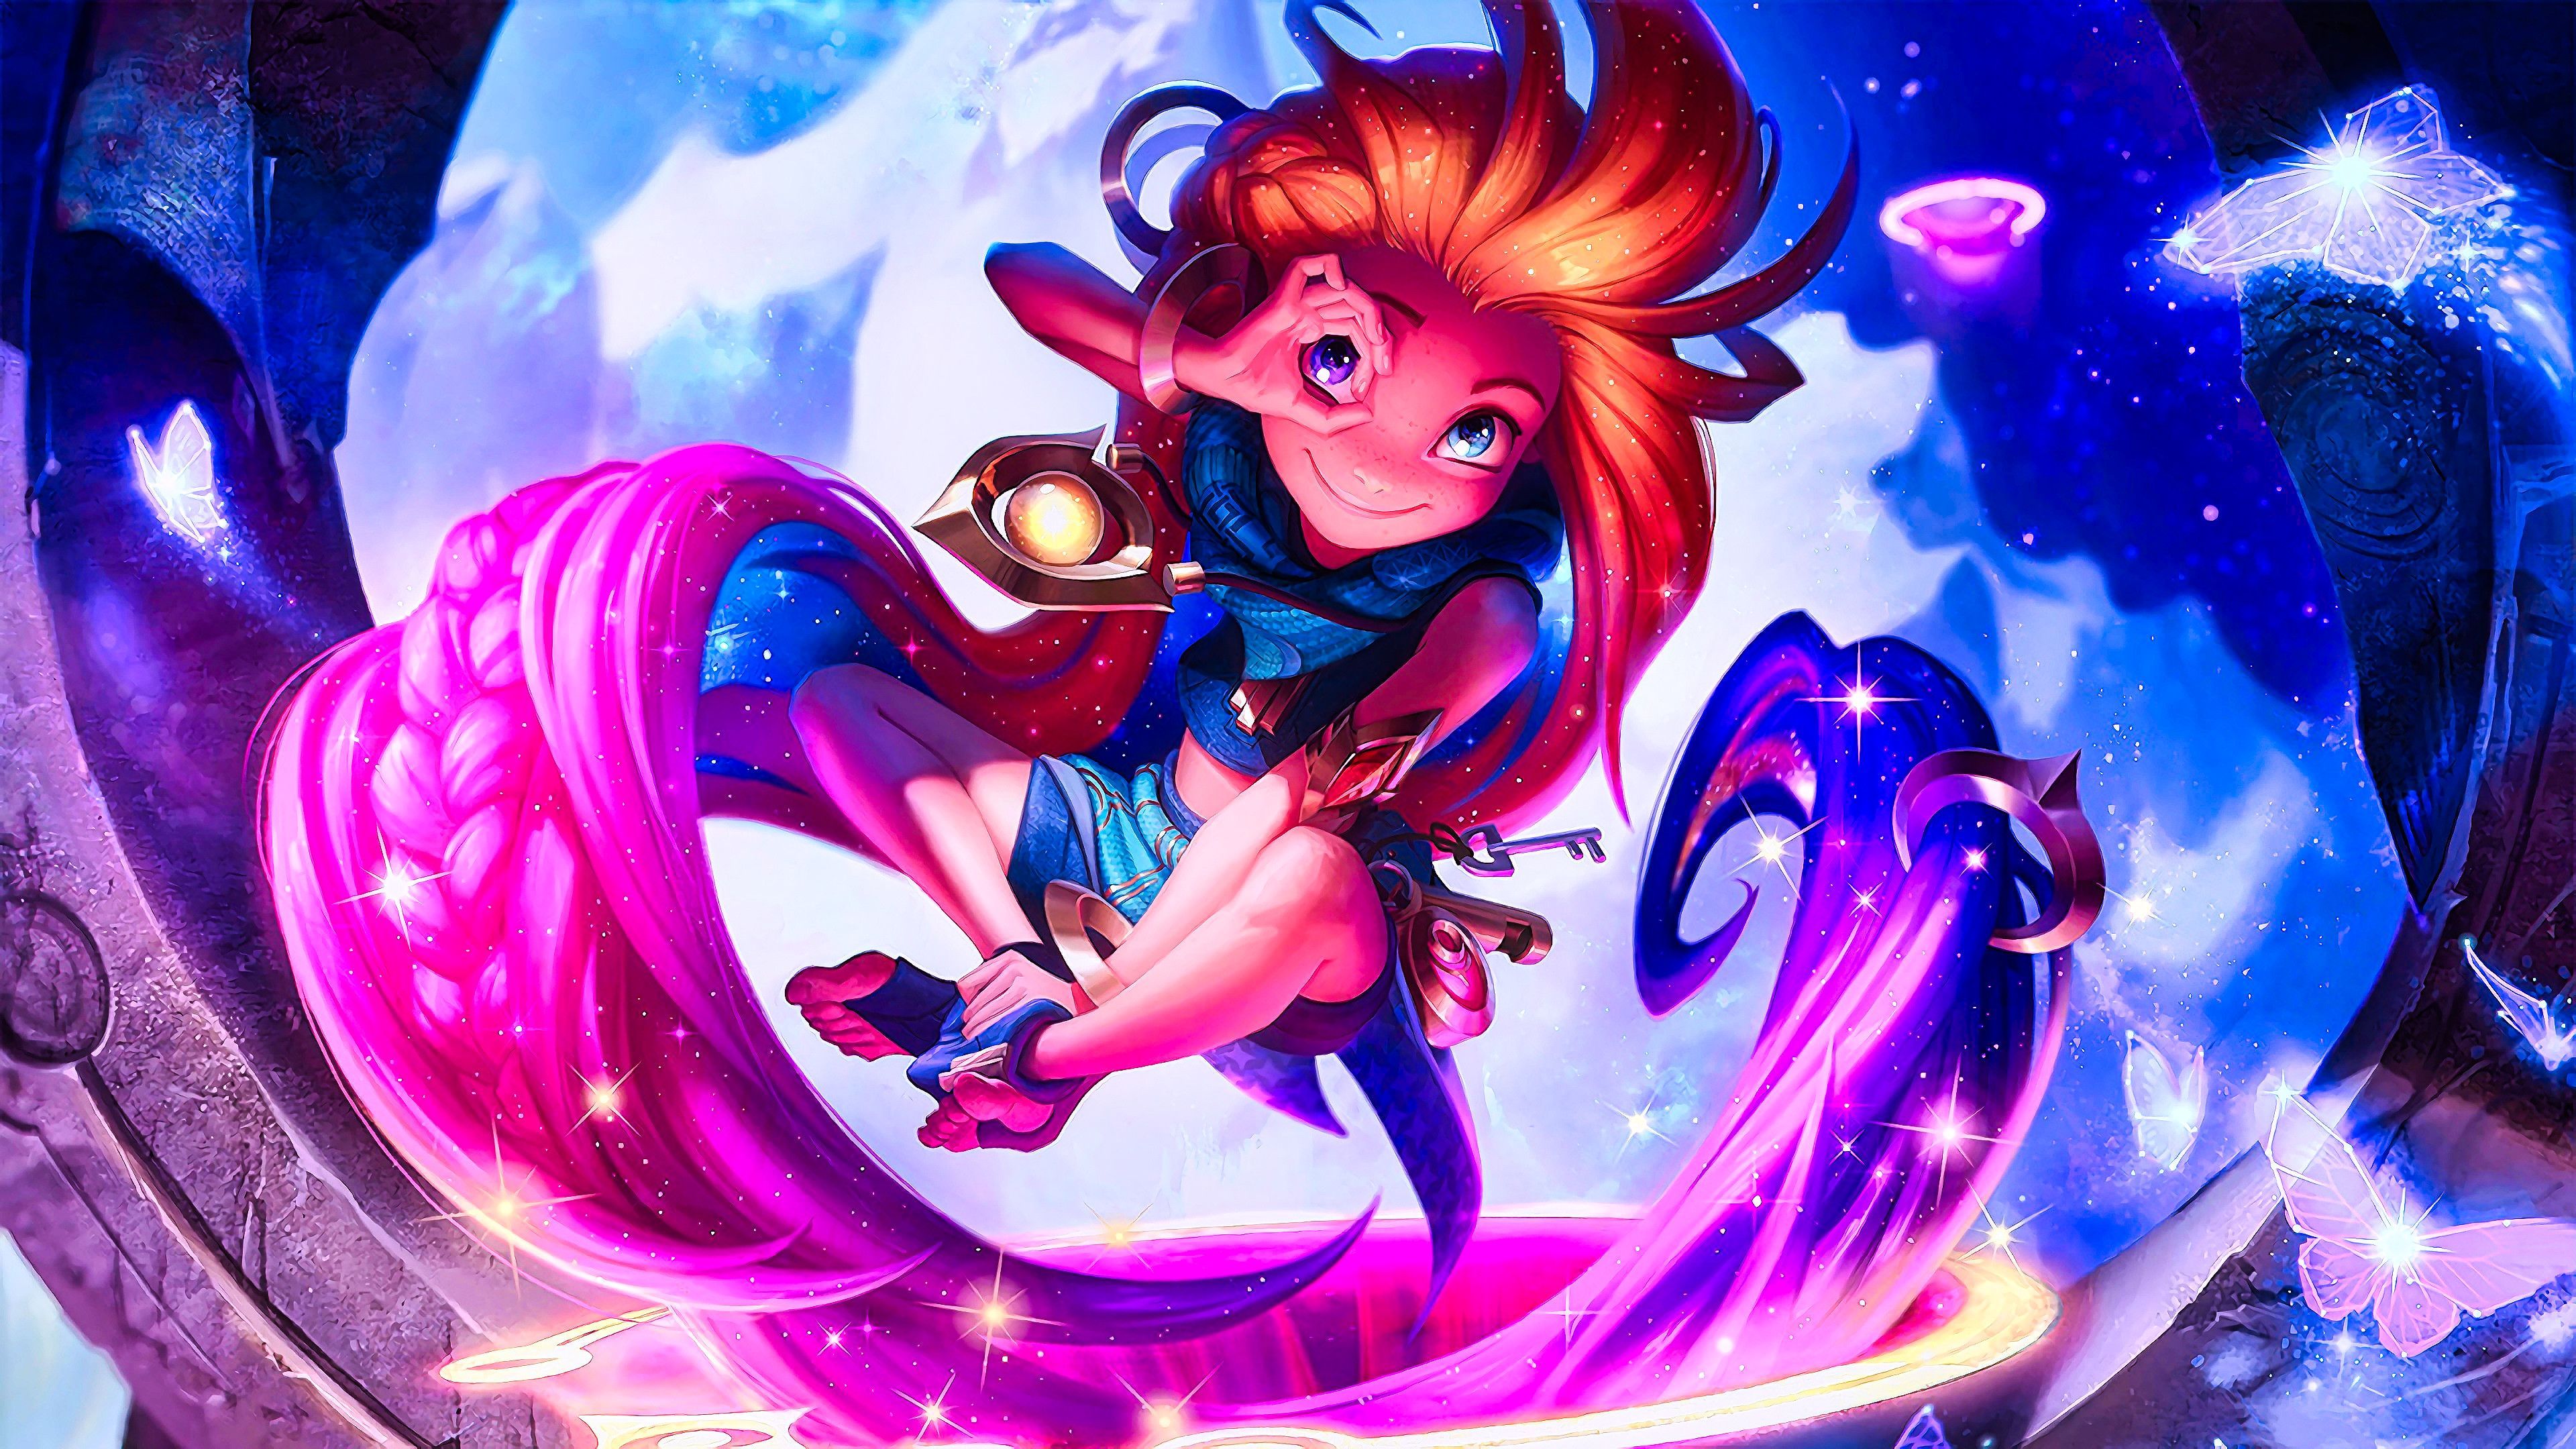 New Champions, Items And Traits Coming To TFT Set 3 Galaxies • L2pbomb. League of legends, League of legends characters, Anime